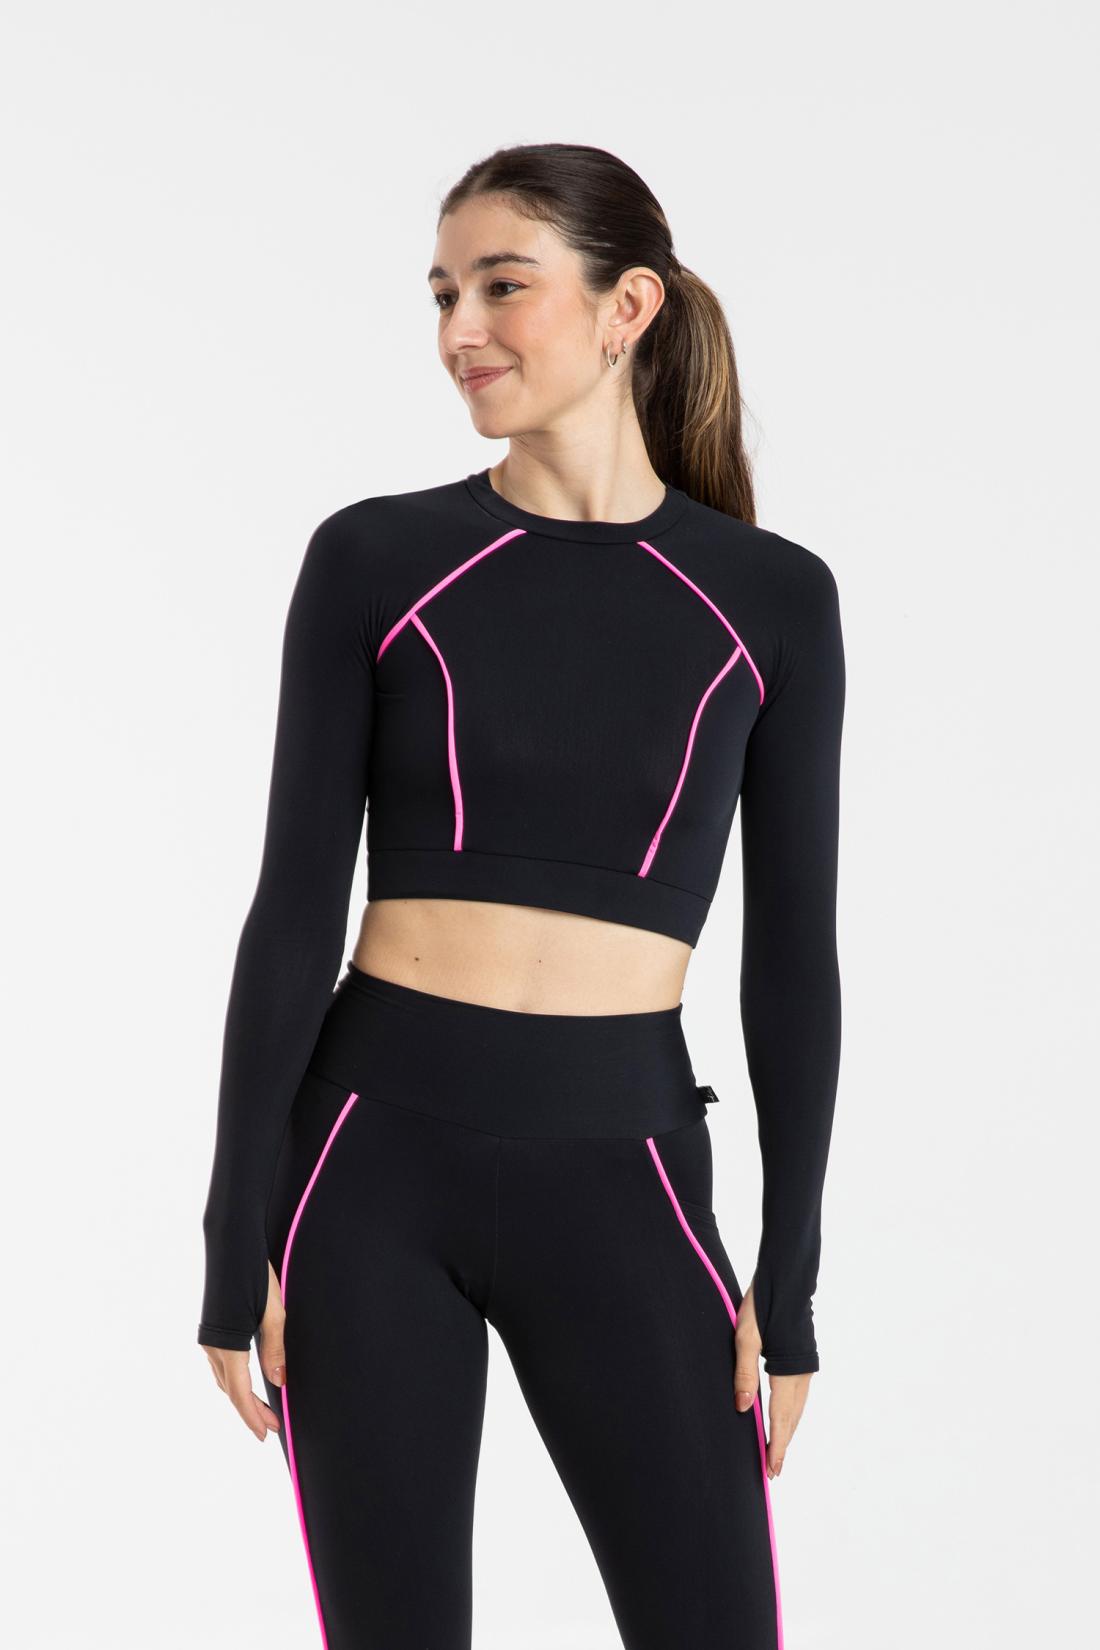 Chenoa Long sleeve top with colored piping Brushed fabric inside for Figure Skating Intermezzo